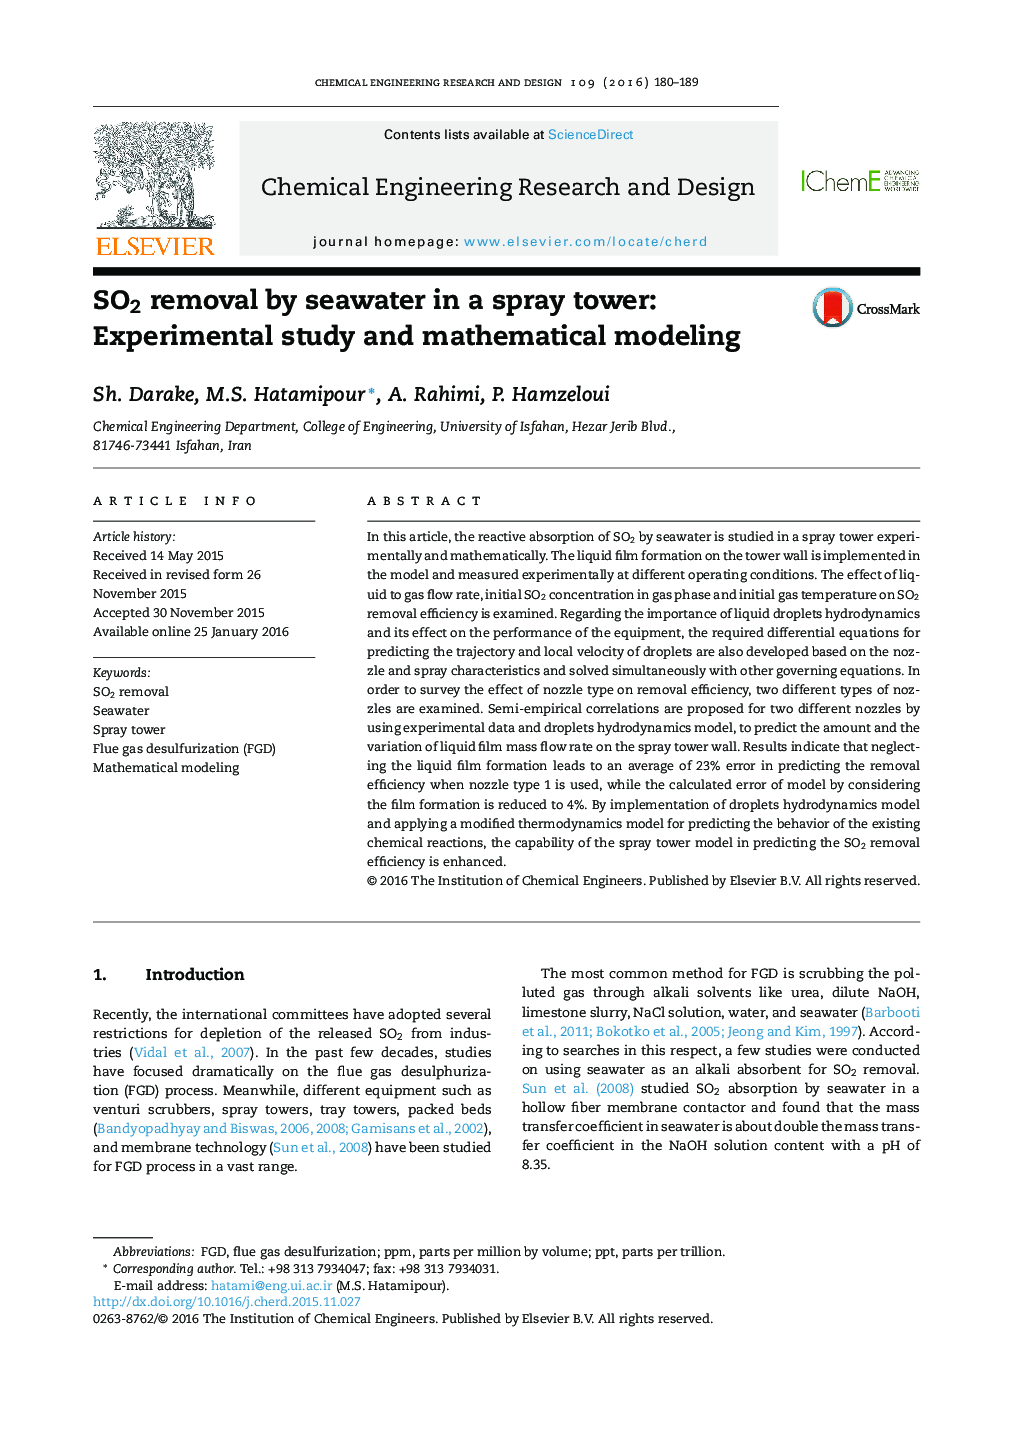 SO2 removal by seawater in a spray tower: Experimental study and mathematical modeling